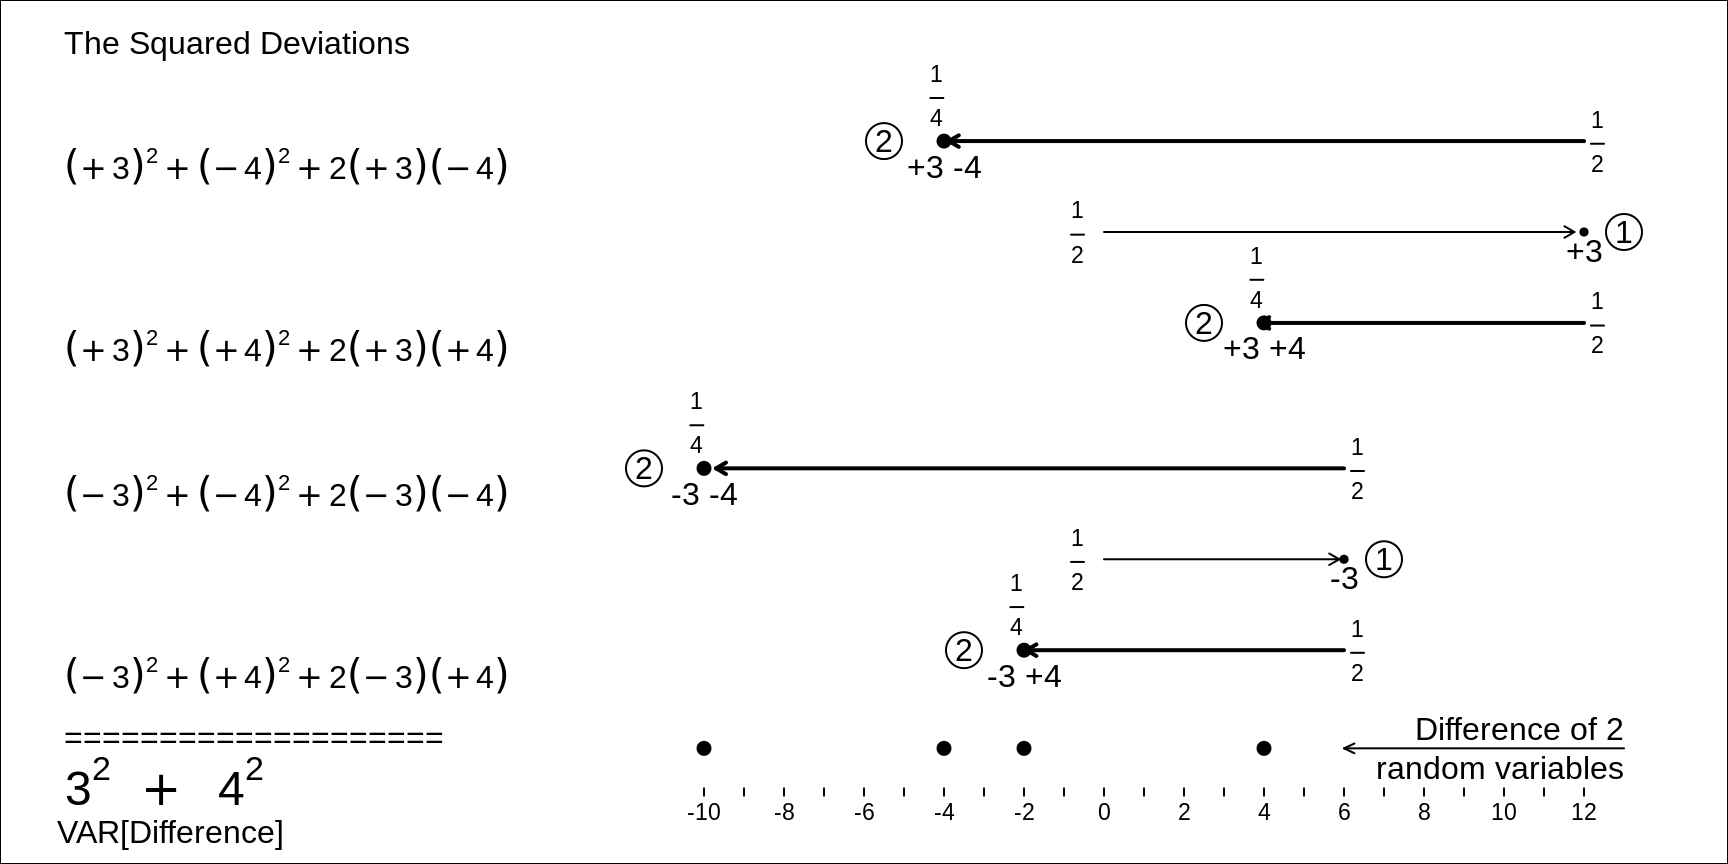 Variance (and thus SD) of the DIFFERENCE, RV1 - RV2, of the two independent random variables, RV1 and RV2, shown above. Each of the 4 equally likely deviations of the difference from its expectation is decomposed into its 2 components. Each each squared deviation becomes a sum of 2 squares, and a 'cross-product'. But the 4 cross-products cancel each other, and you are left with the SUMS of two squares, the original 3-squared and the  original 4-squared, i.e. the variances of RV1 and RV2.